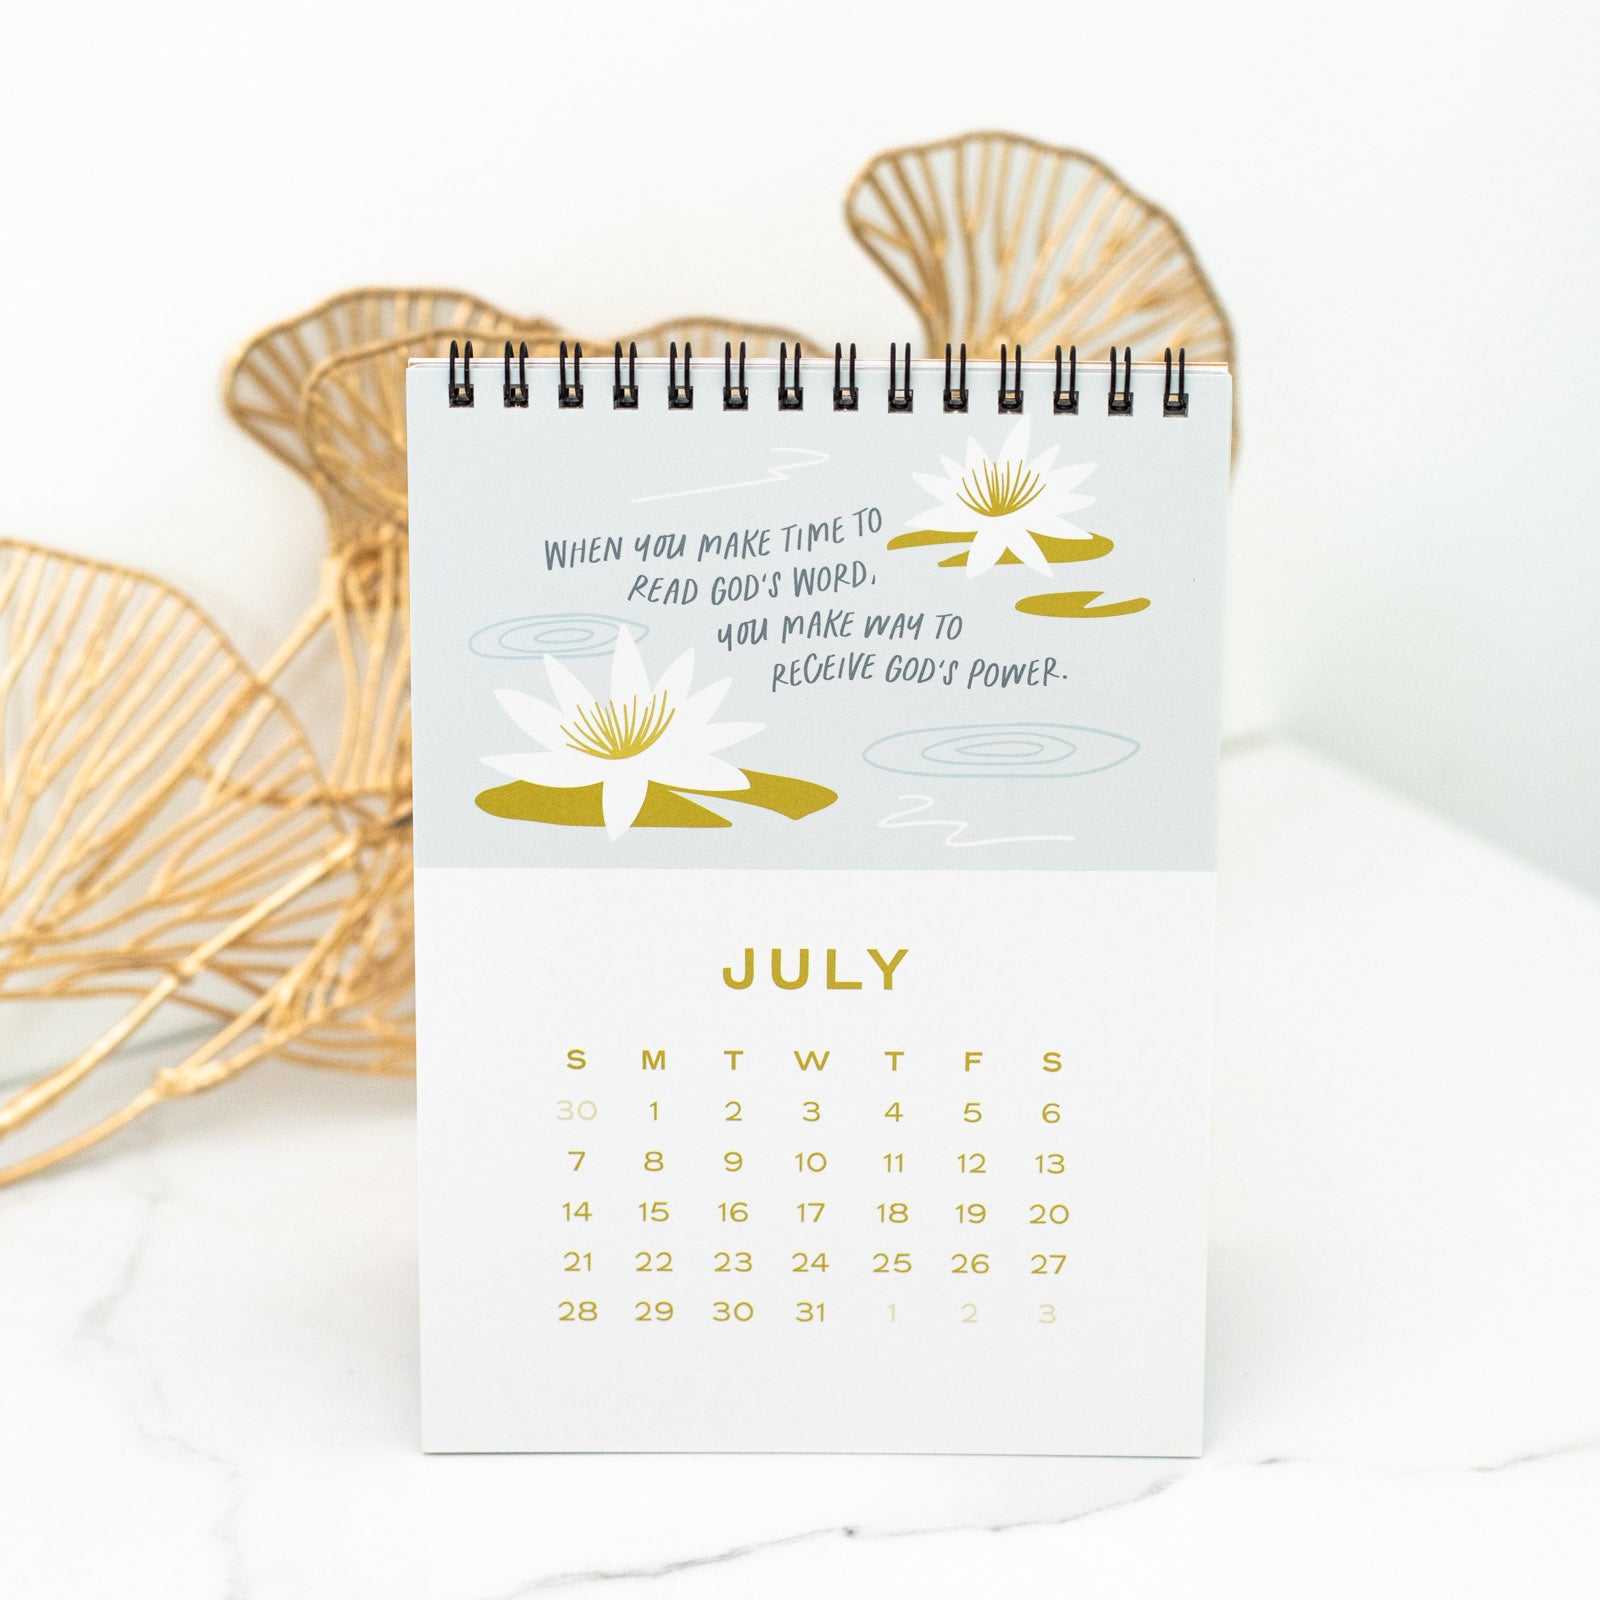 2024 Calendar: Peace When You Are Anxious & Overwhelmed